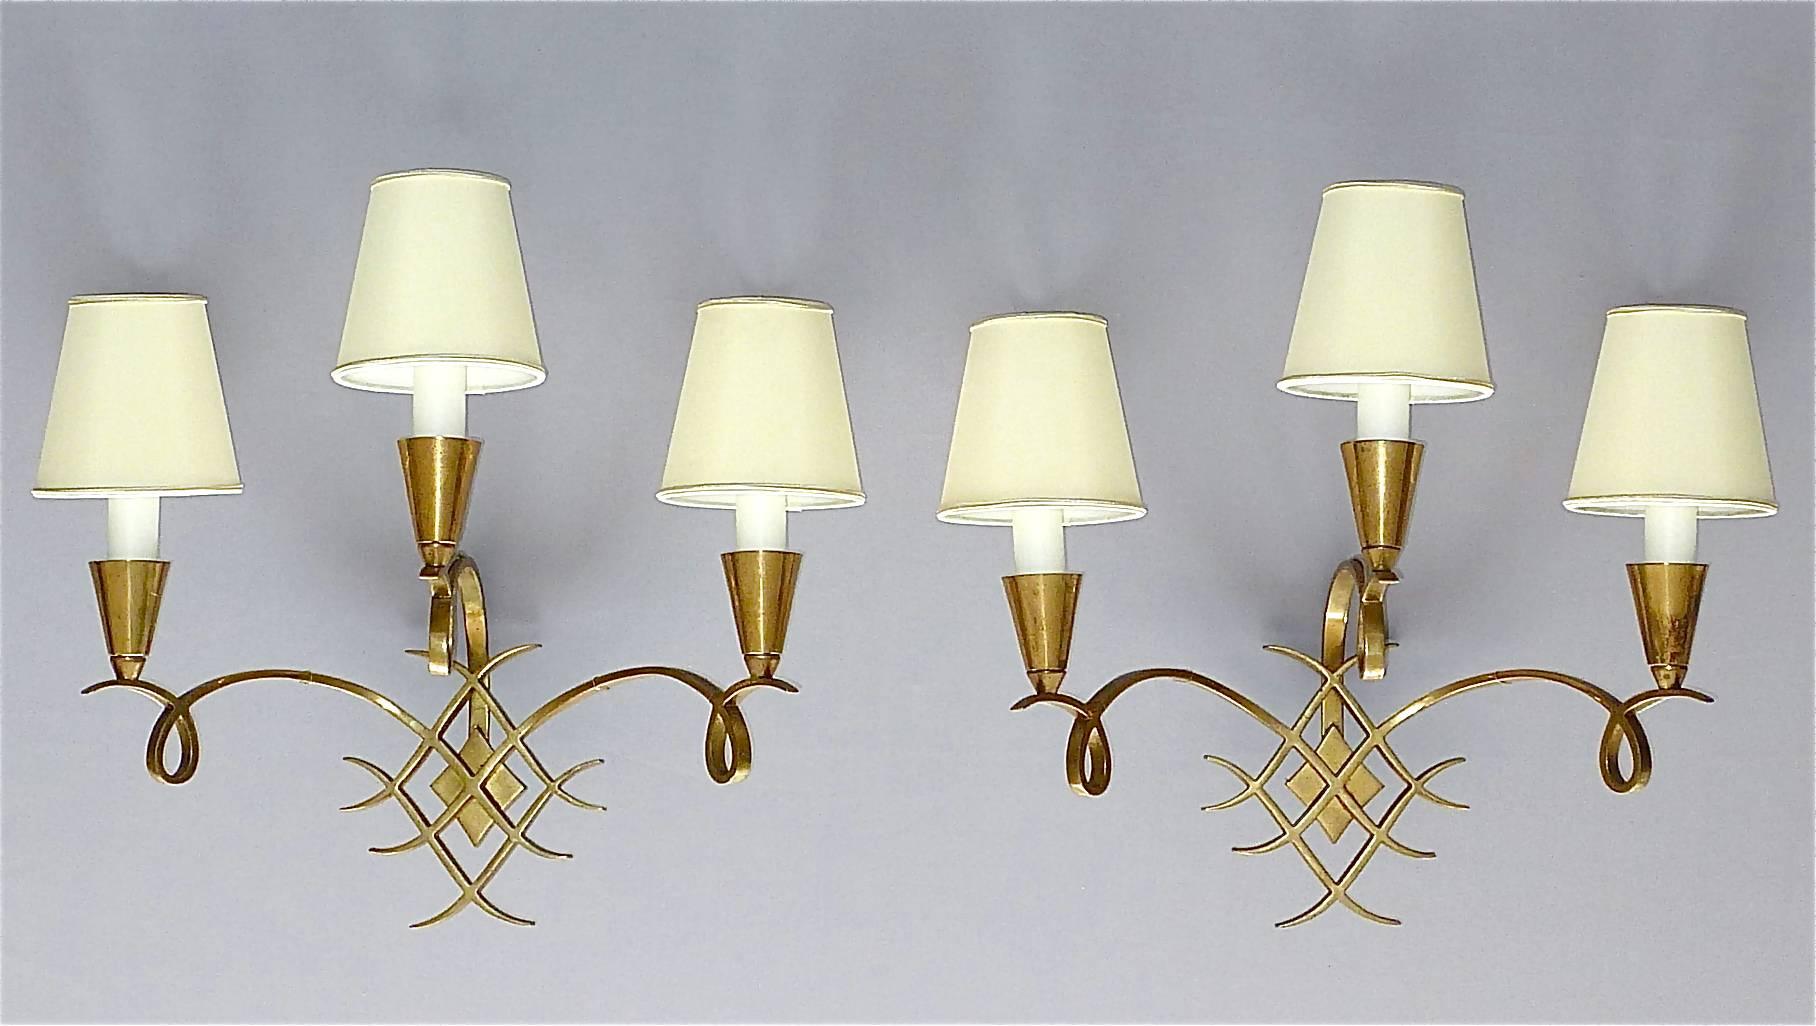 Elegant and large pair of French Art Deco bronze wall lights or sconces by Jules Leleu, France, circa 1935-1945. Each lamp is made of bronze and has three scrolled arms. They are newly rewired and the French fitting is replaced. They are in fine